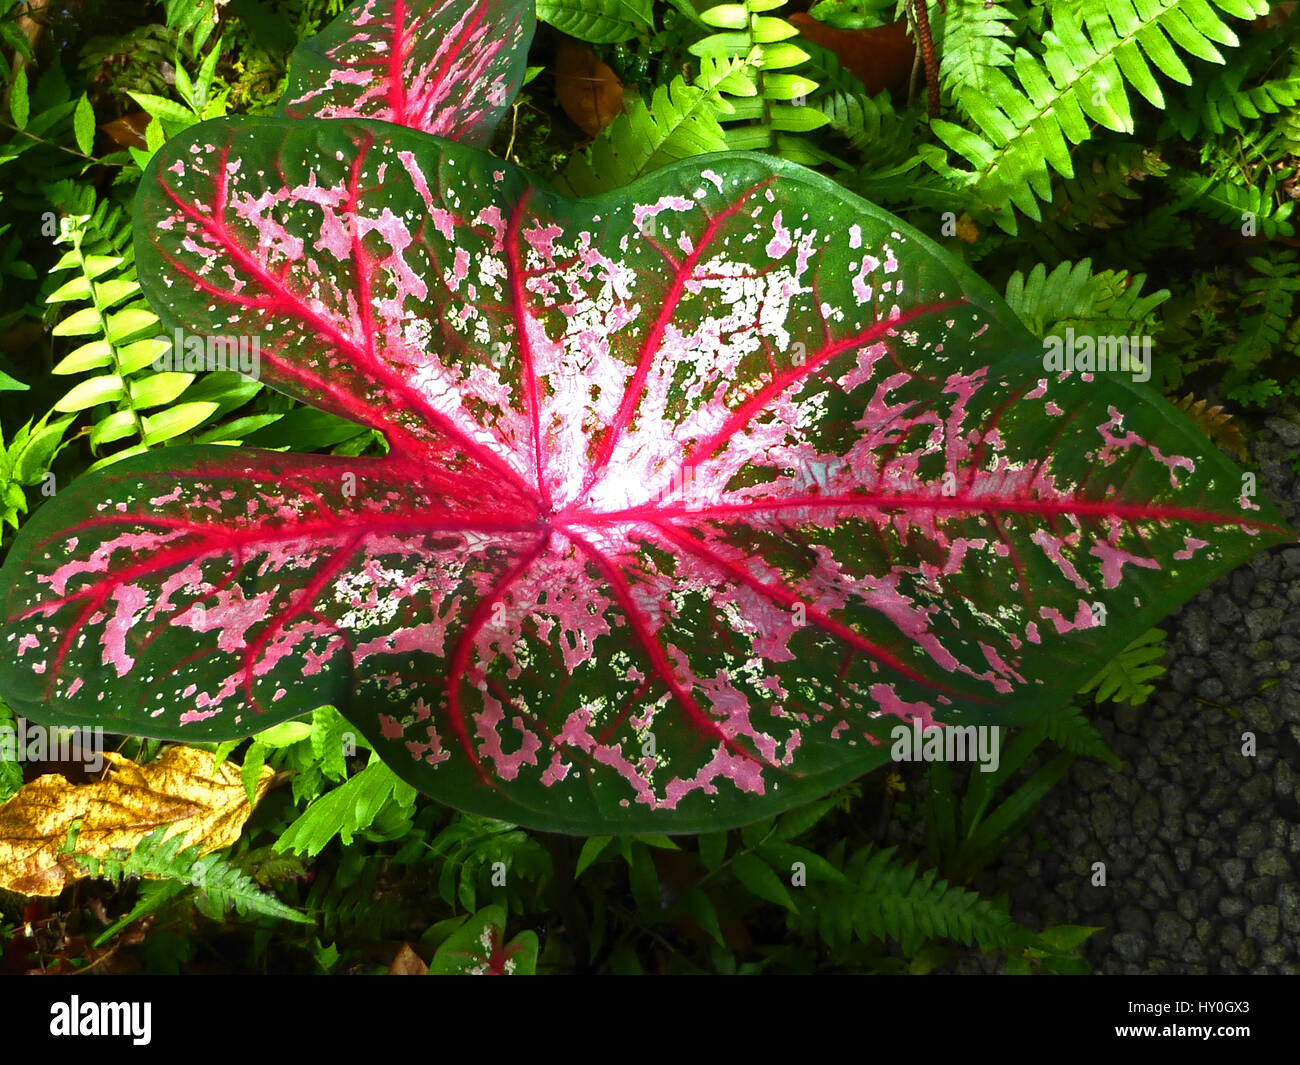 Red, white and green on the leaf of the Elephant Ear Plant - Caladium - as seen on St Lucia in the Caribbean Stock Photo